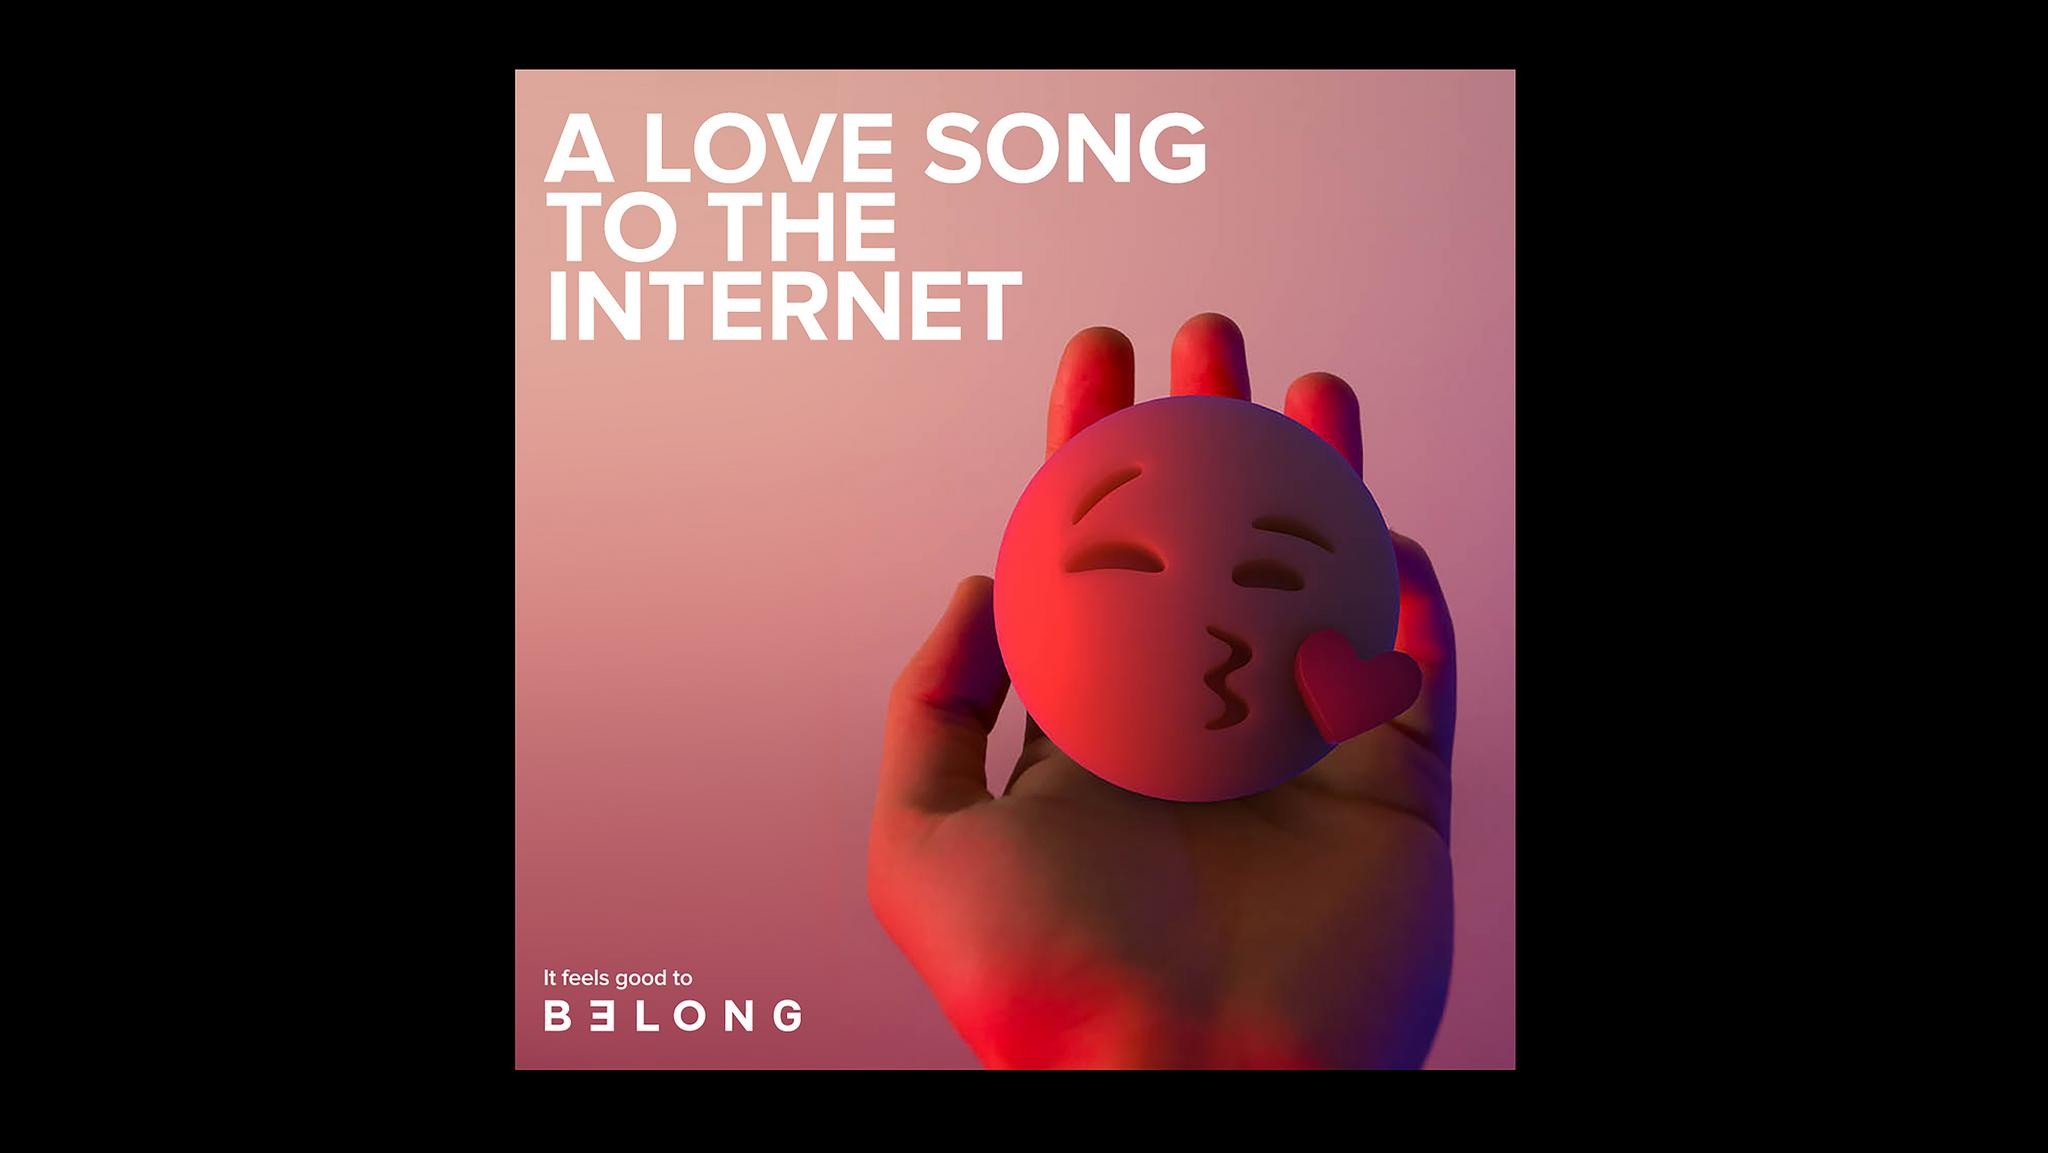 A LOVE SONG TO THE INTERNET